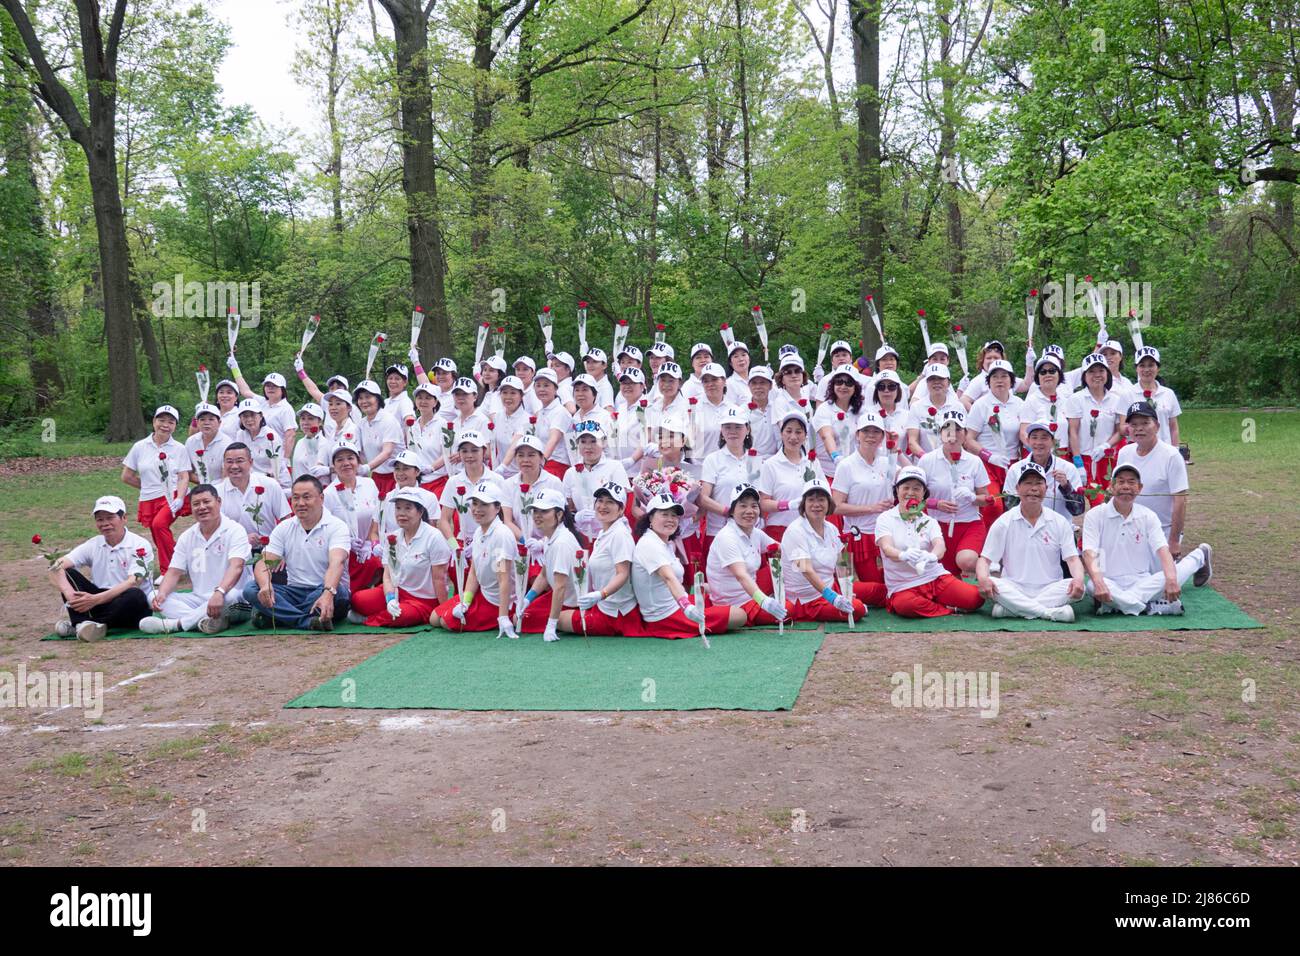 Chinese women & some men from the Kai Xin Yizhu dance troupe celebrate Mother's Day by posing for a group photo while holding roses. In a park in NYC. Stock Photo